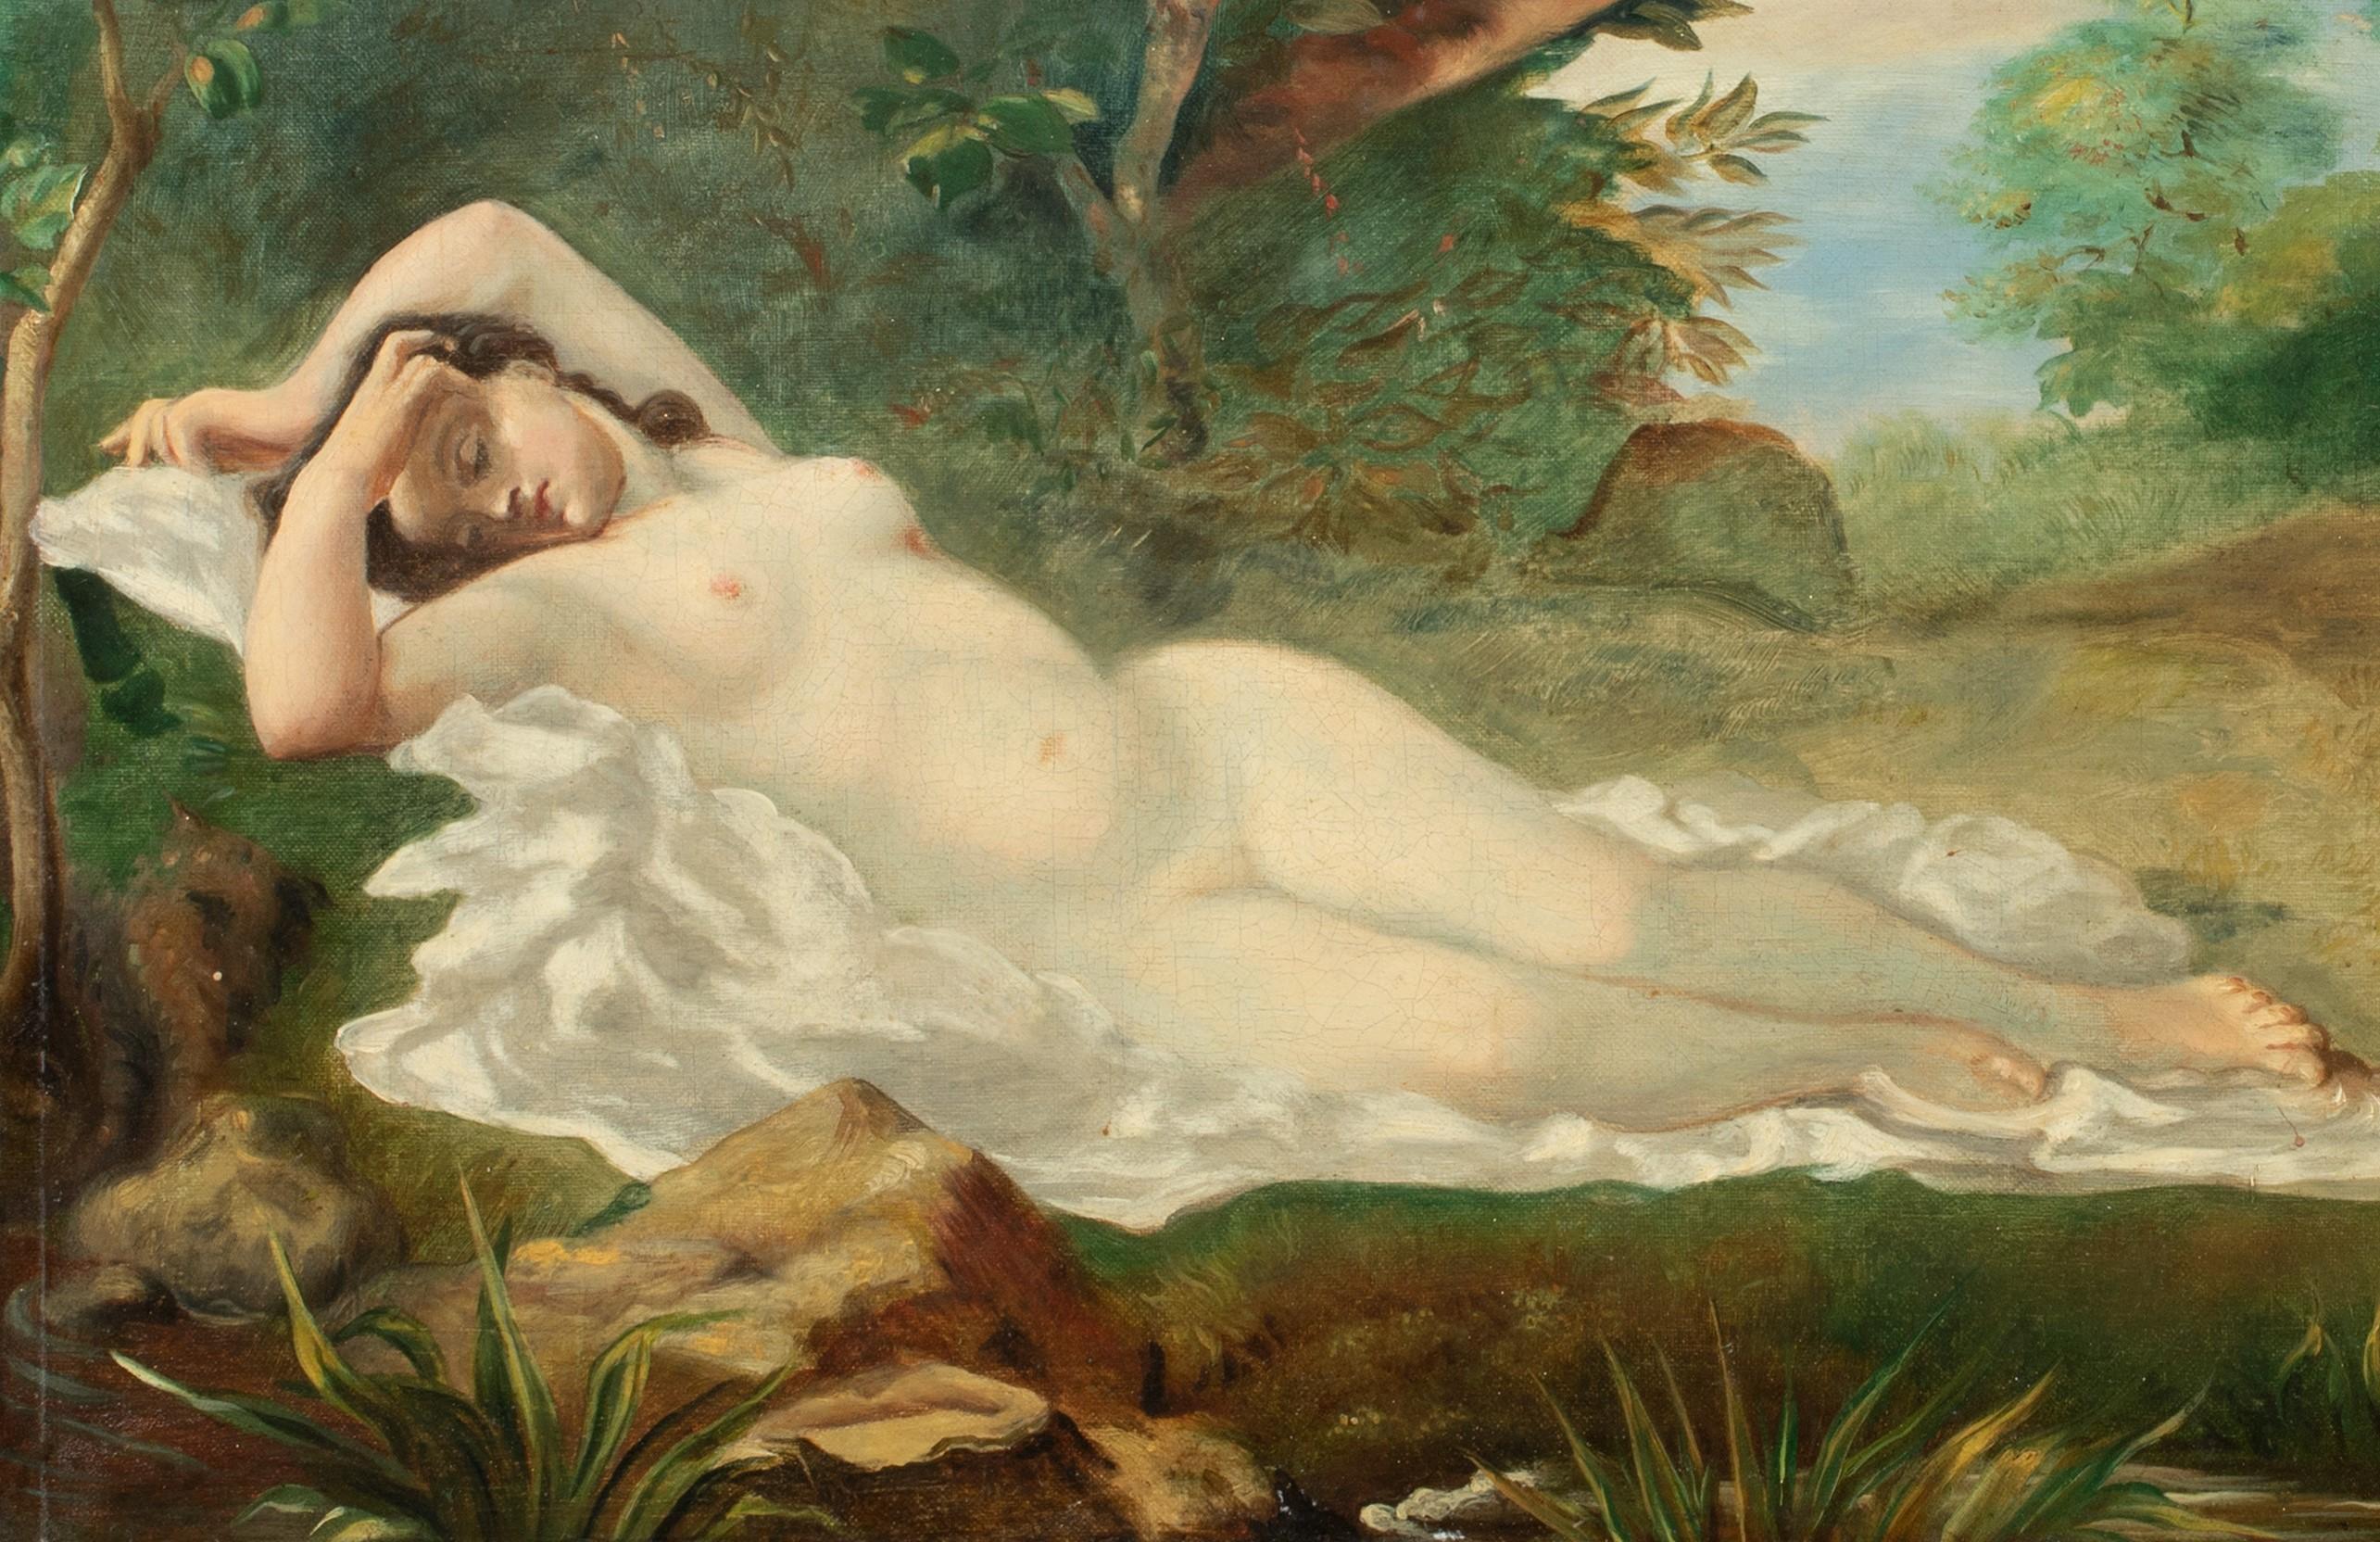 Nude Sleeping In The Forest, 19th century  - Painting by Unknown